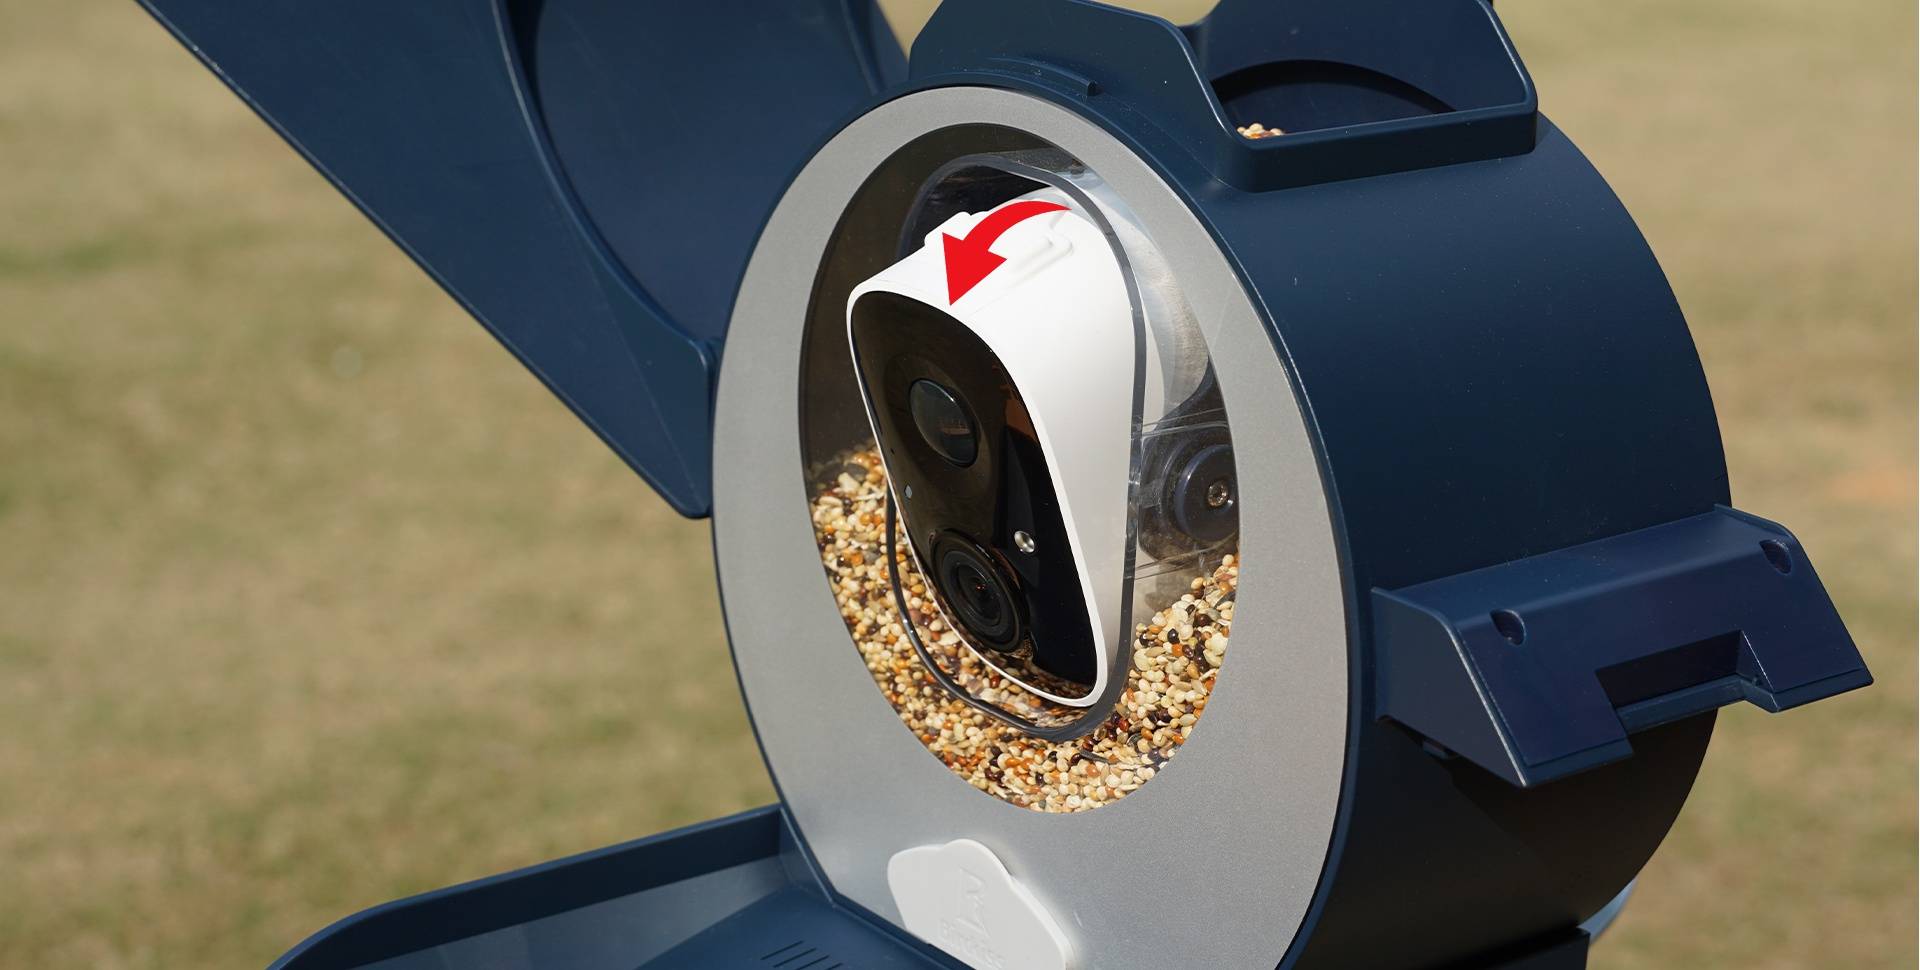 Rotating Smart Camera on the Birdkiss Smart Bird Feeder for Optimal Viewing